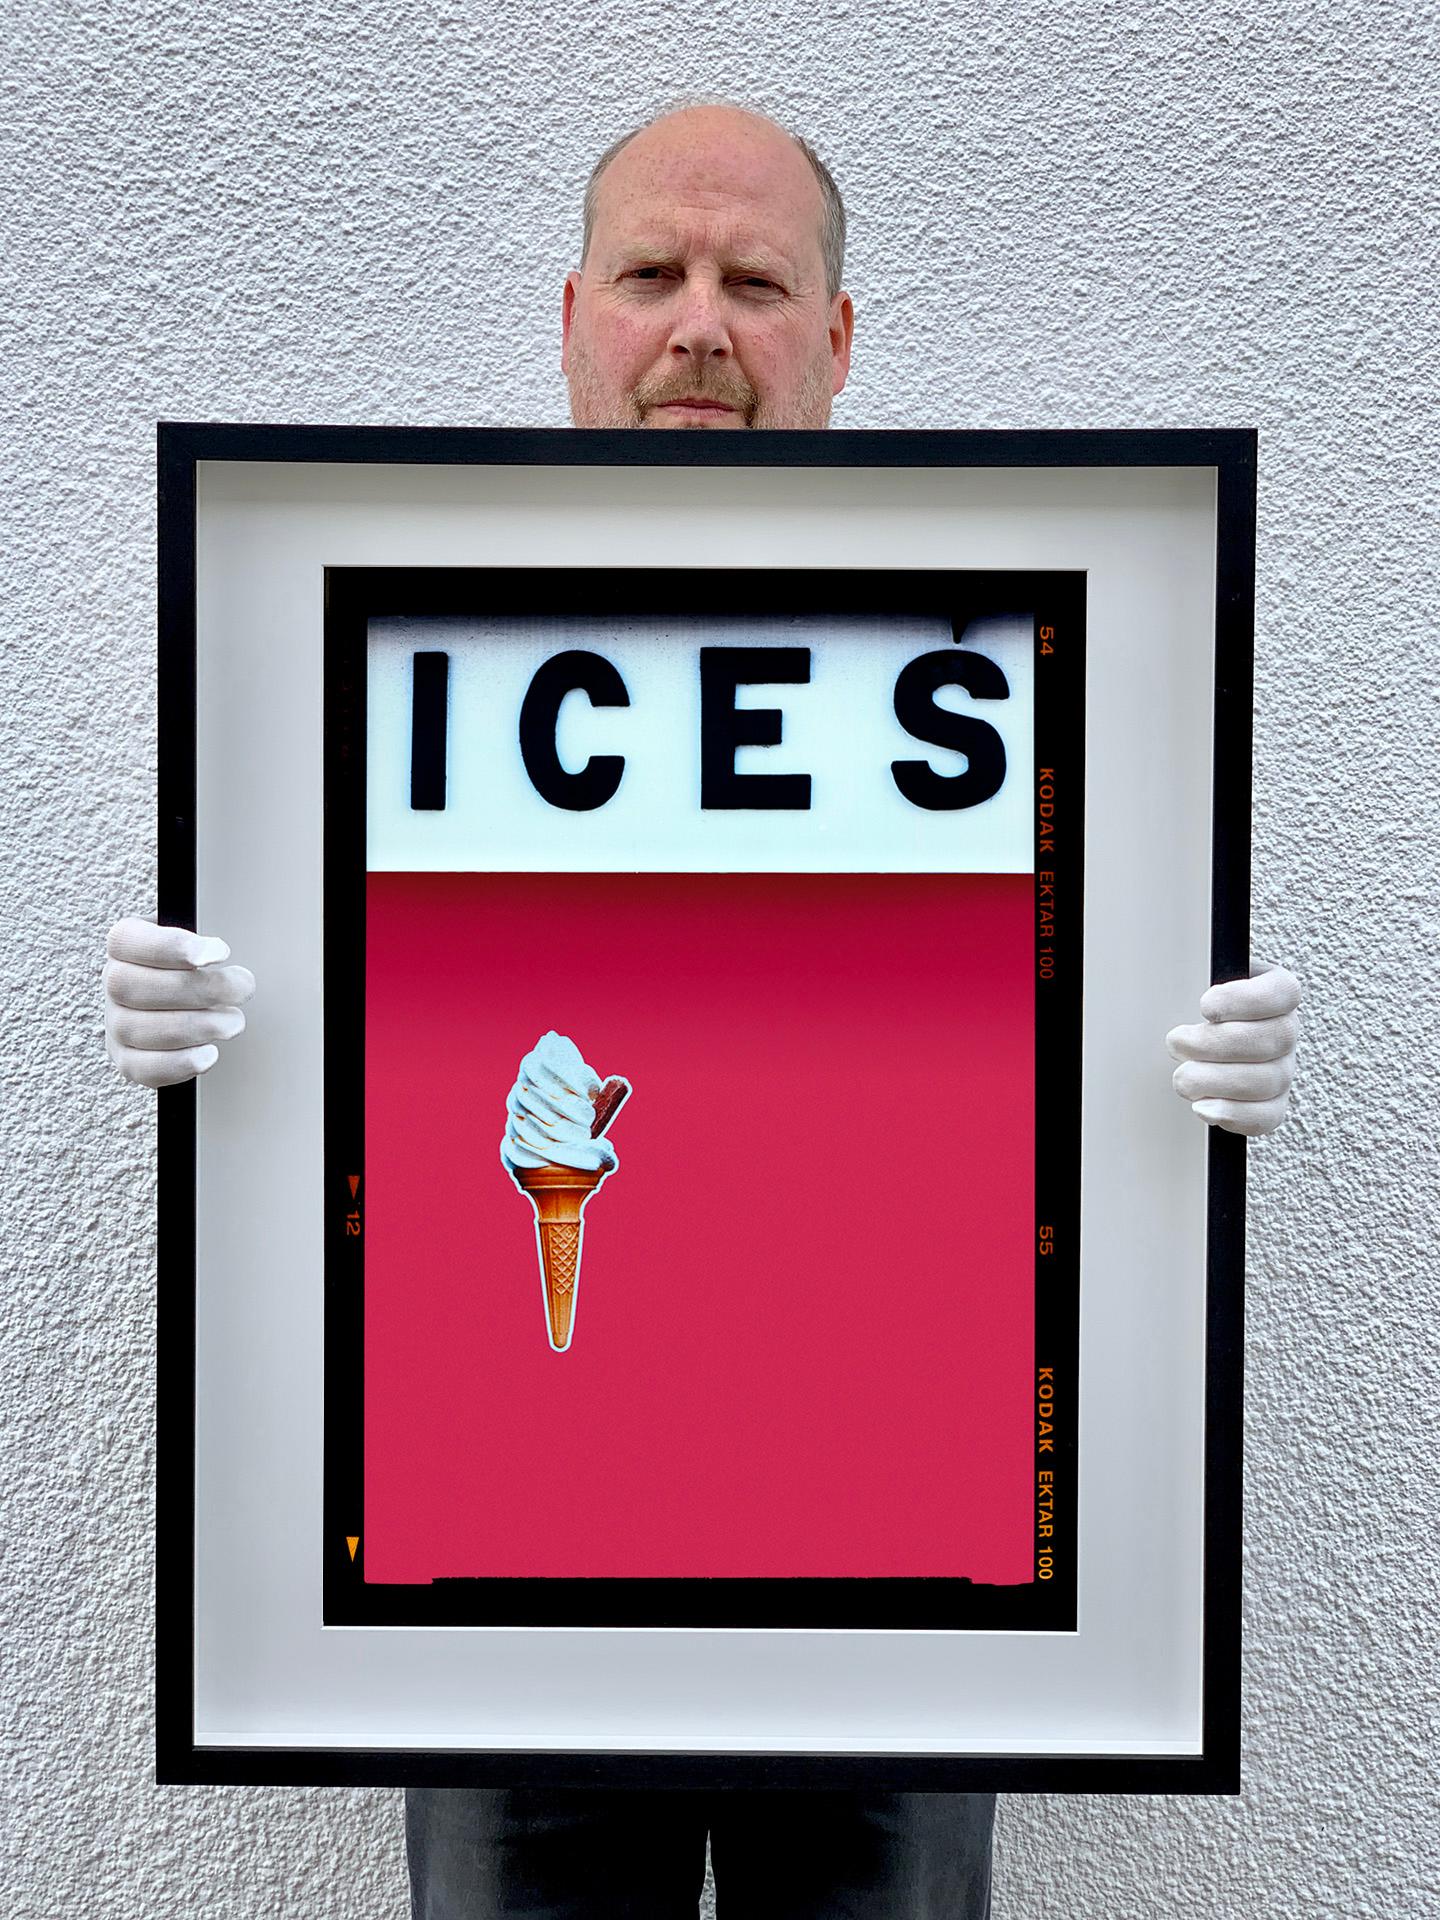 ICES, by Richard Heeps, photographed at the British Seaside at the end of summer 2020. This artwork is about evoking memories of the simple joy of days by the beach. The raspberry red pink color blocking, typography and the surreal twist of the